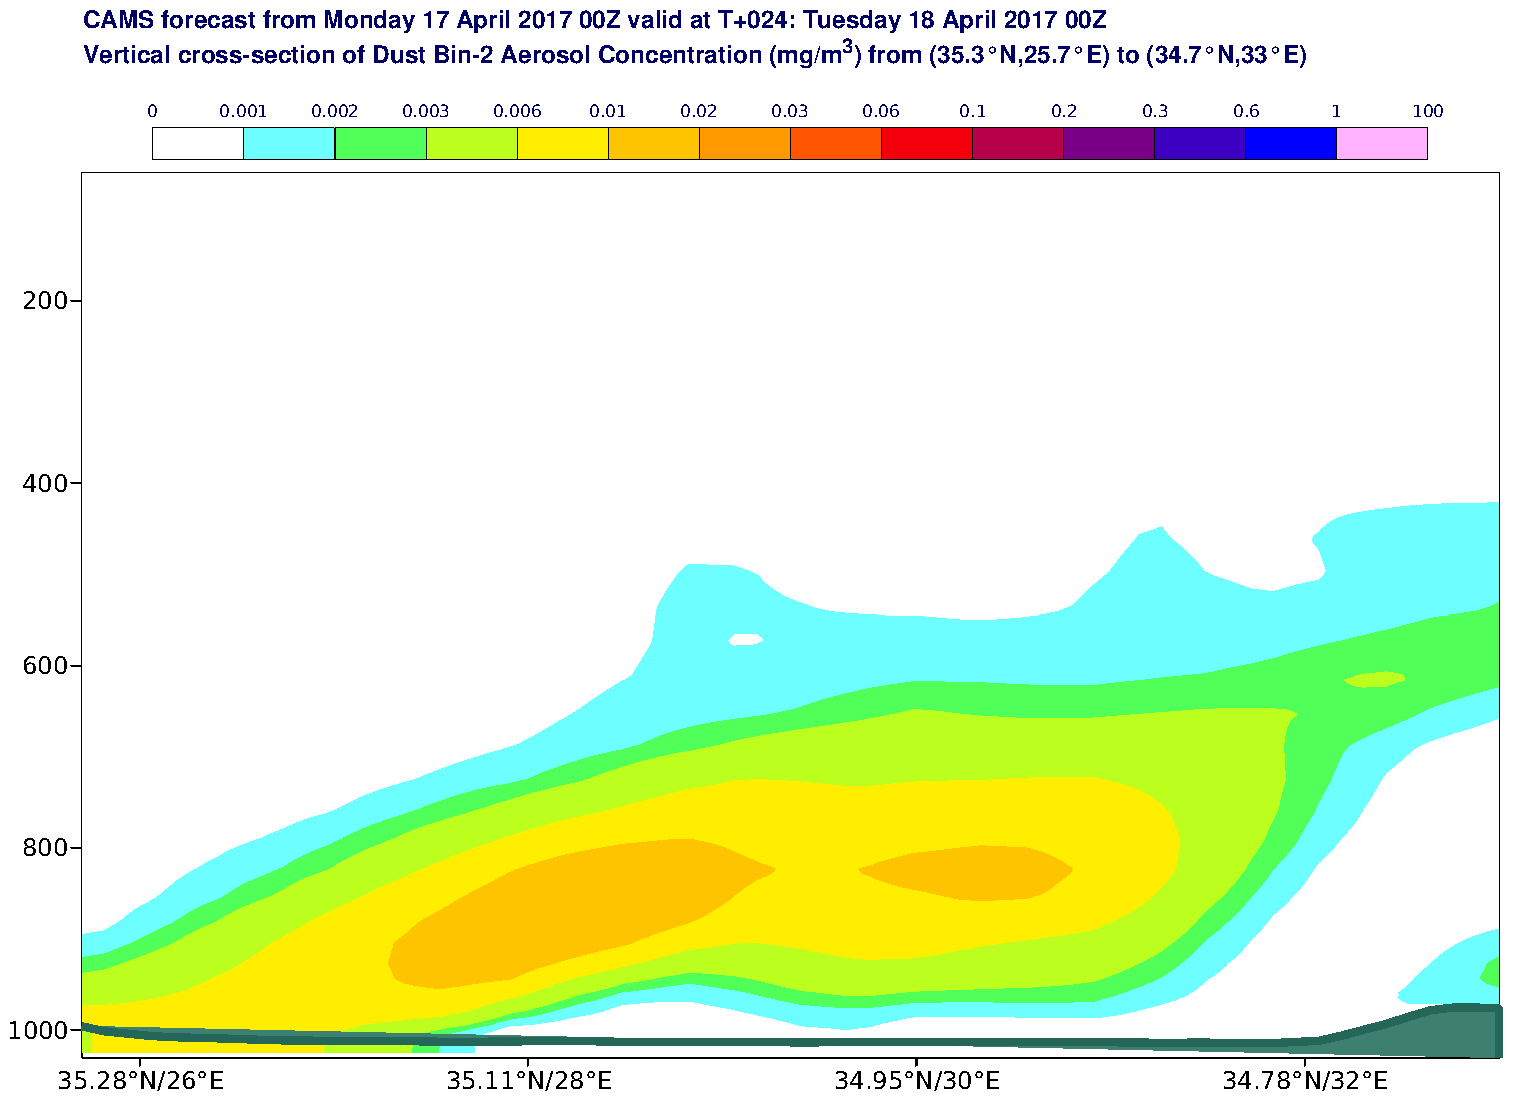 Vertical cross-section of Dust Bin-2 Aerosol Concentration (mg/m3) valid at T24 - 2017-04-18 00:00